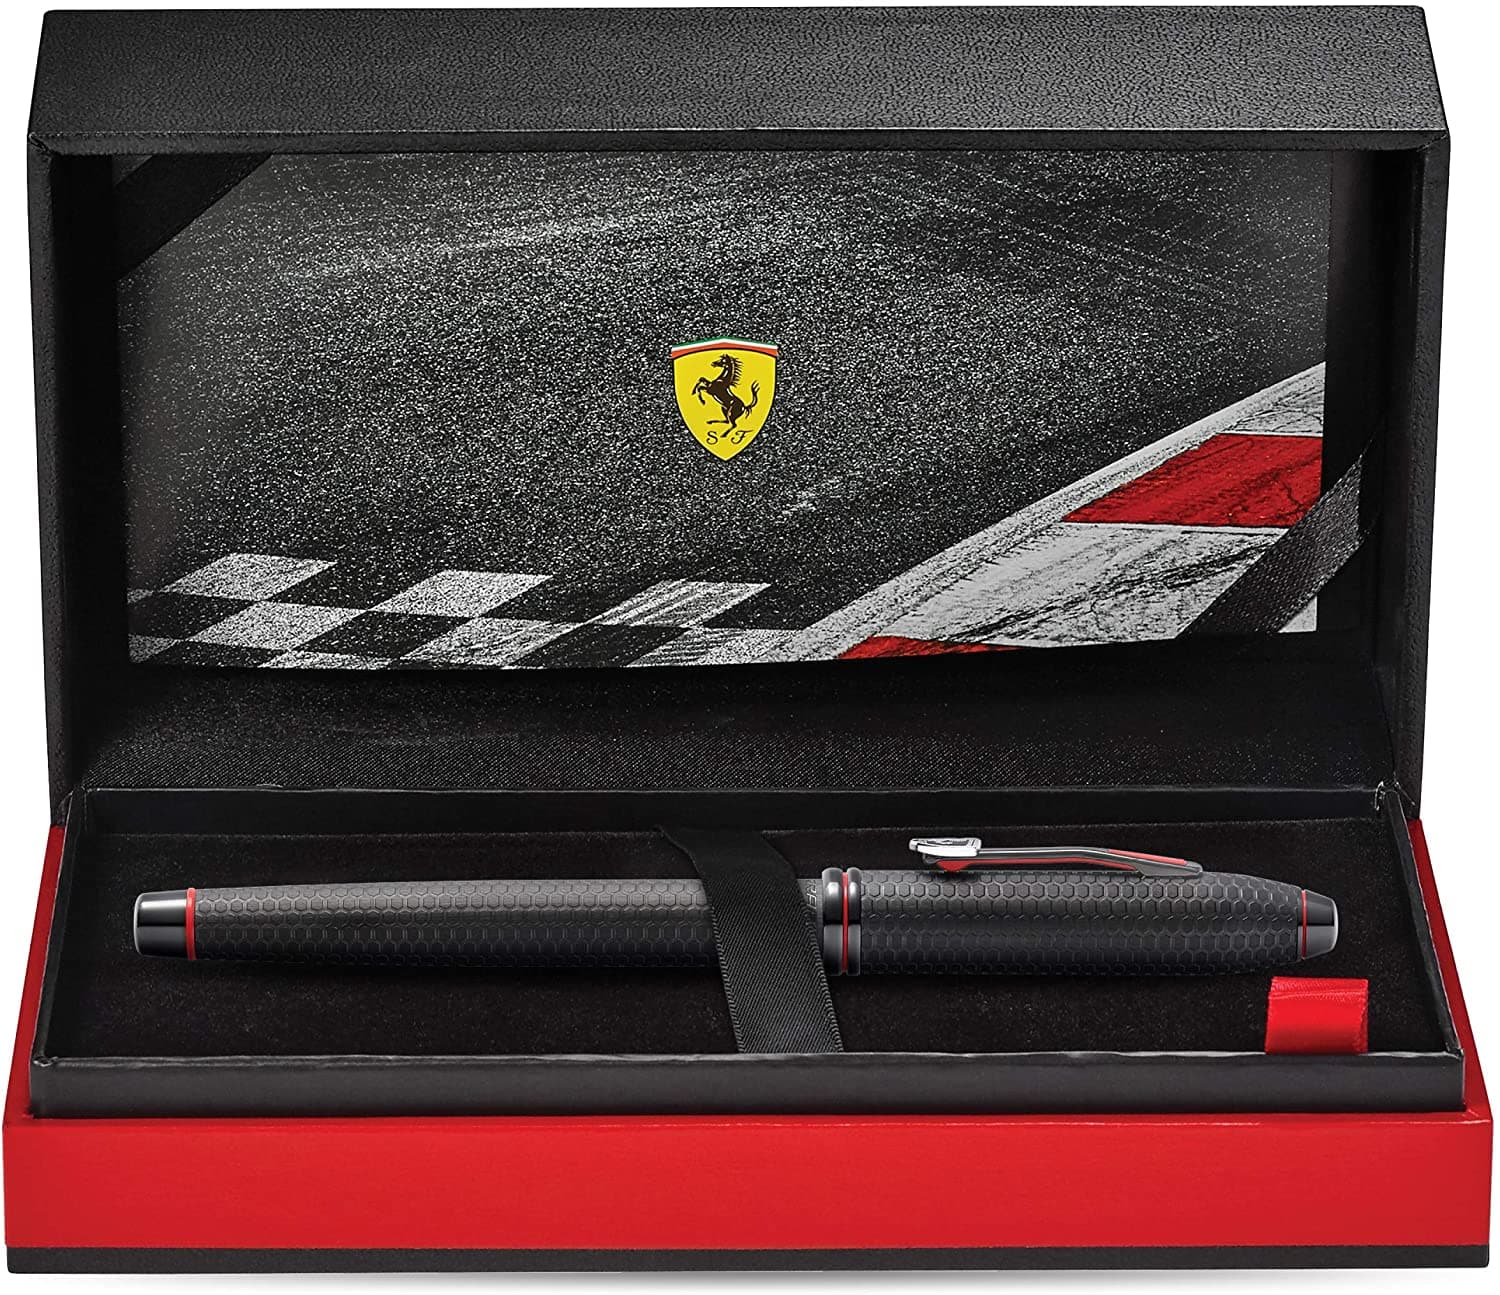 Cross Townsend Collection for Scuderia Ferrari Brushed Black Chemically Etched Honeycomb Pattern Fountain Pen - FR0046-58MD